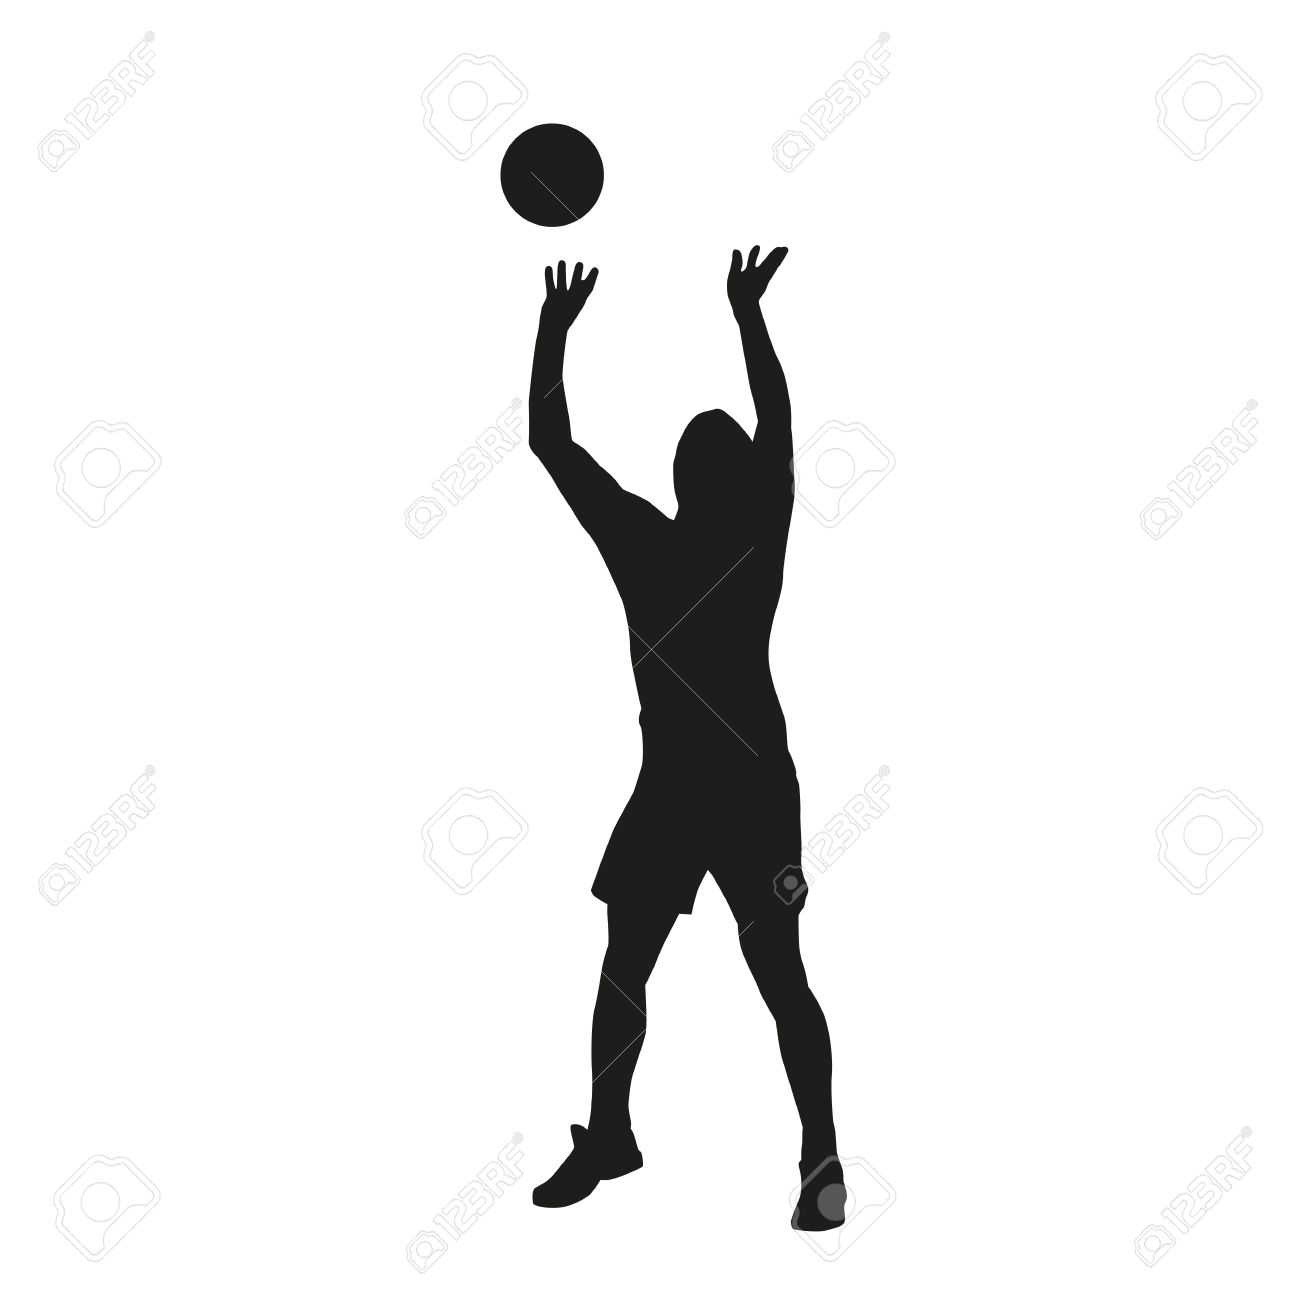 Volleyball player silhouette » Clipart Station.